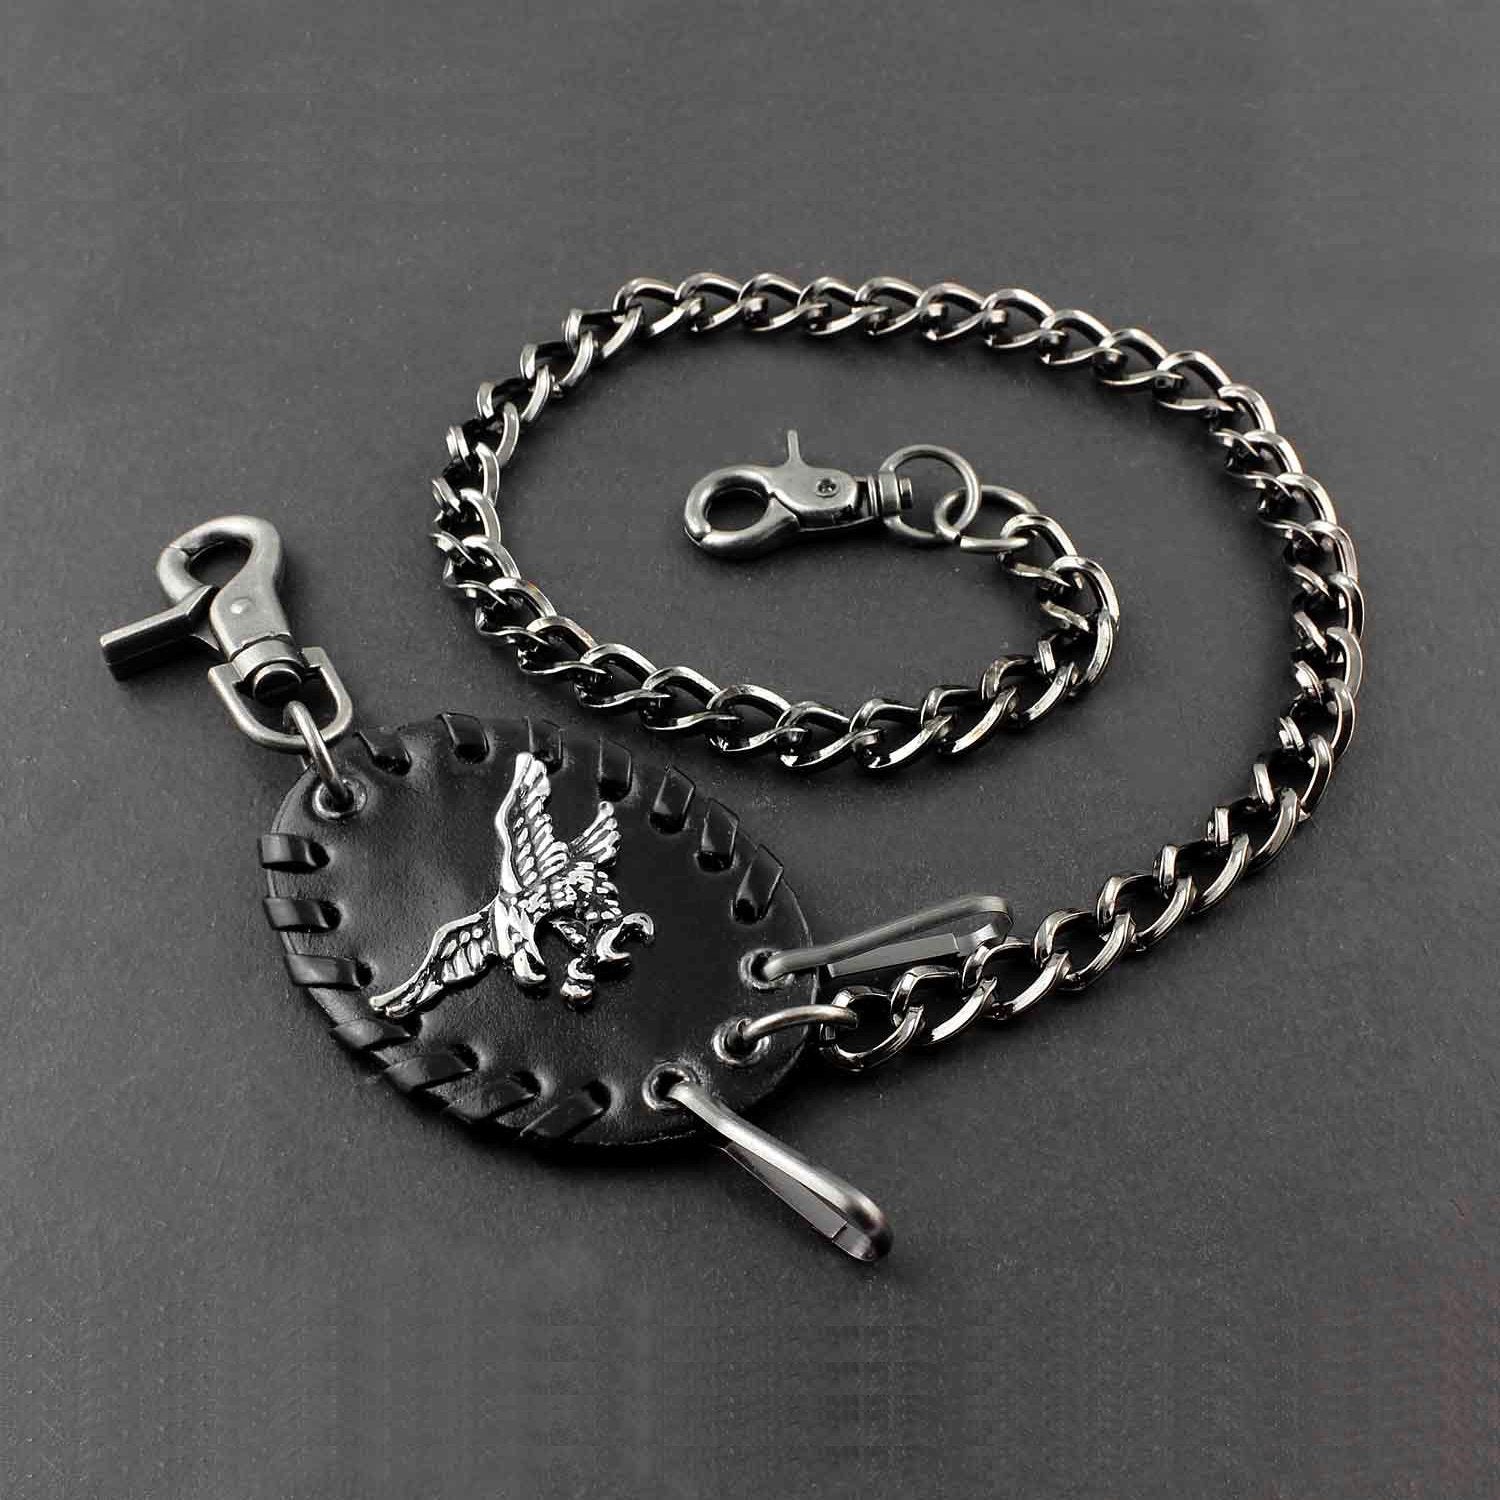 Solid Stainless Steel Eagle Wallet Chain Cool Punk Rock Biker Trucker Wallet Chain Trucker Wallet Chain for Men